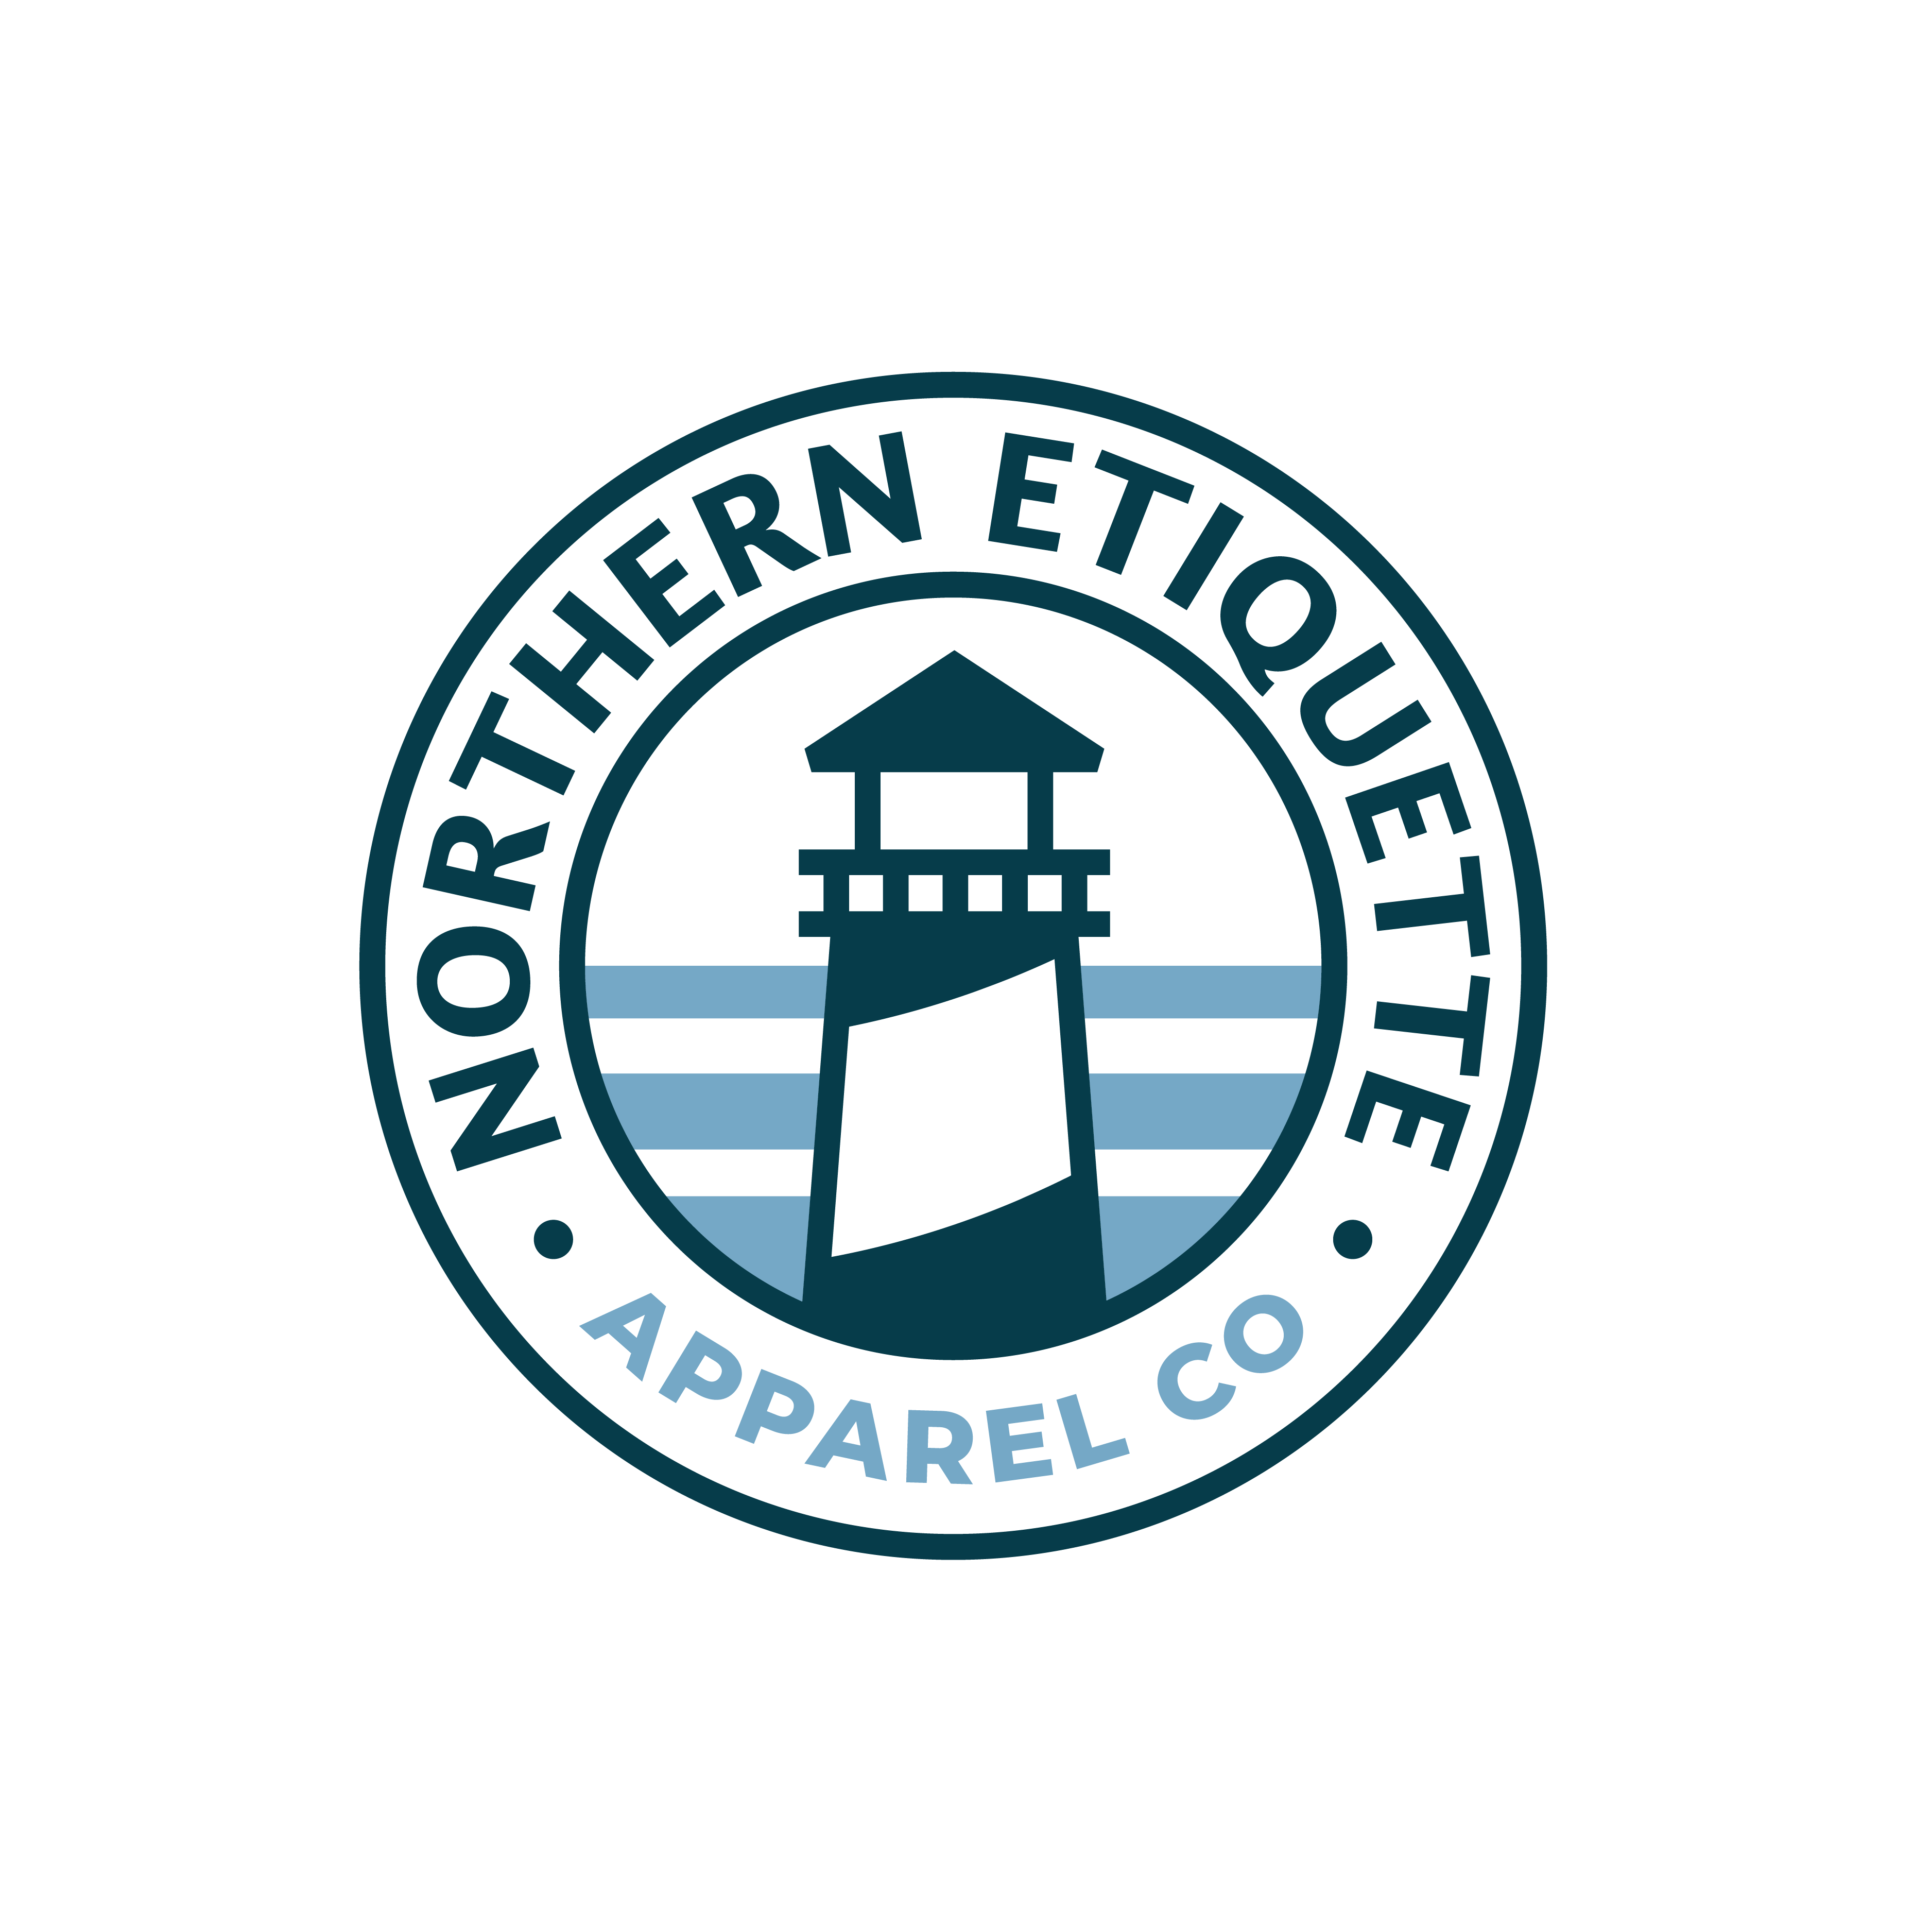 Northern Etiquette logo design by logo designer SKDCo. for your inspiration and for the worlds largest logo competition